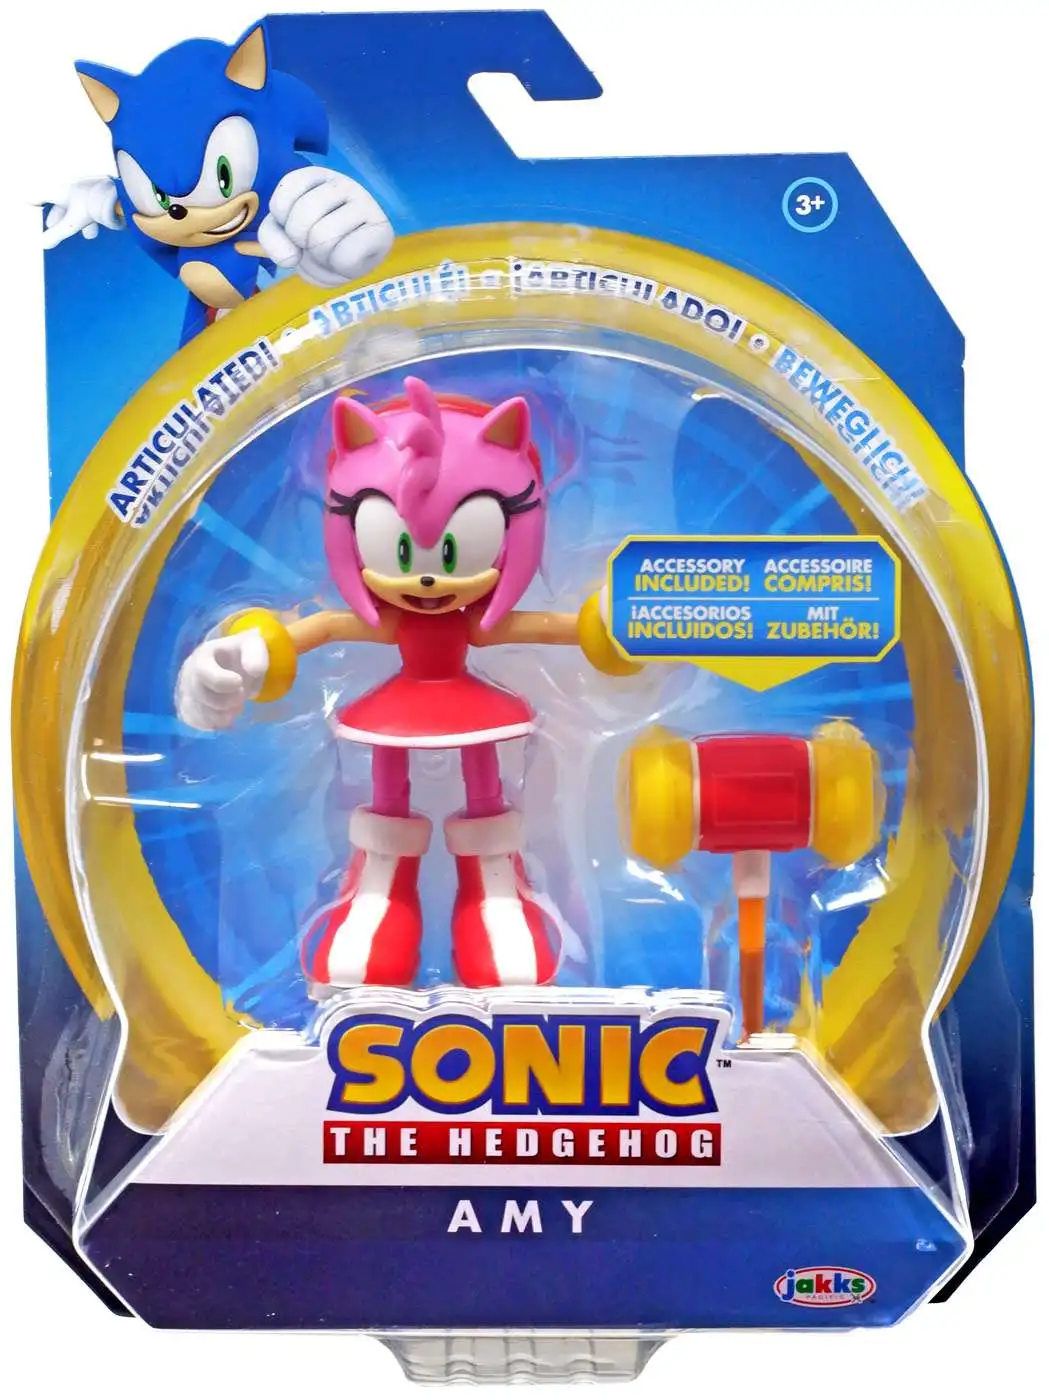 Sonic the Hedgehog – Modern Amy with Hammer Action Figure Set, 2